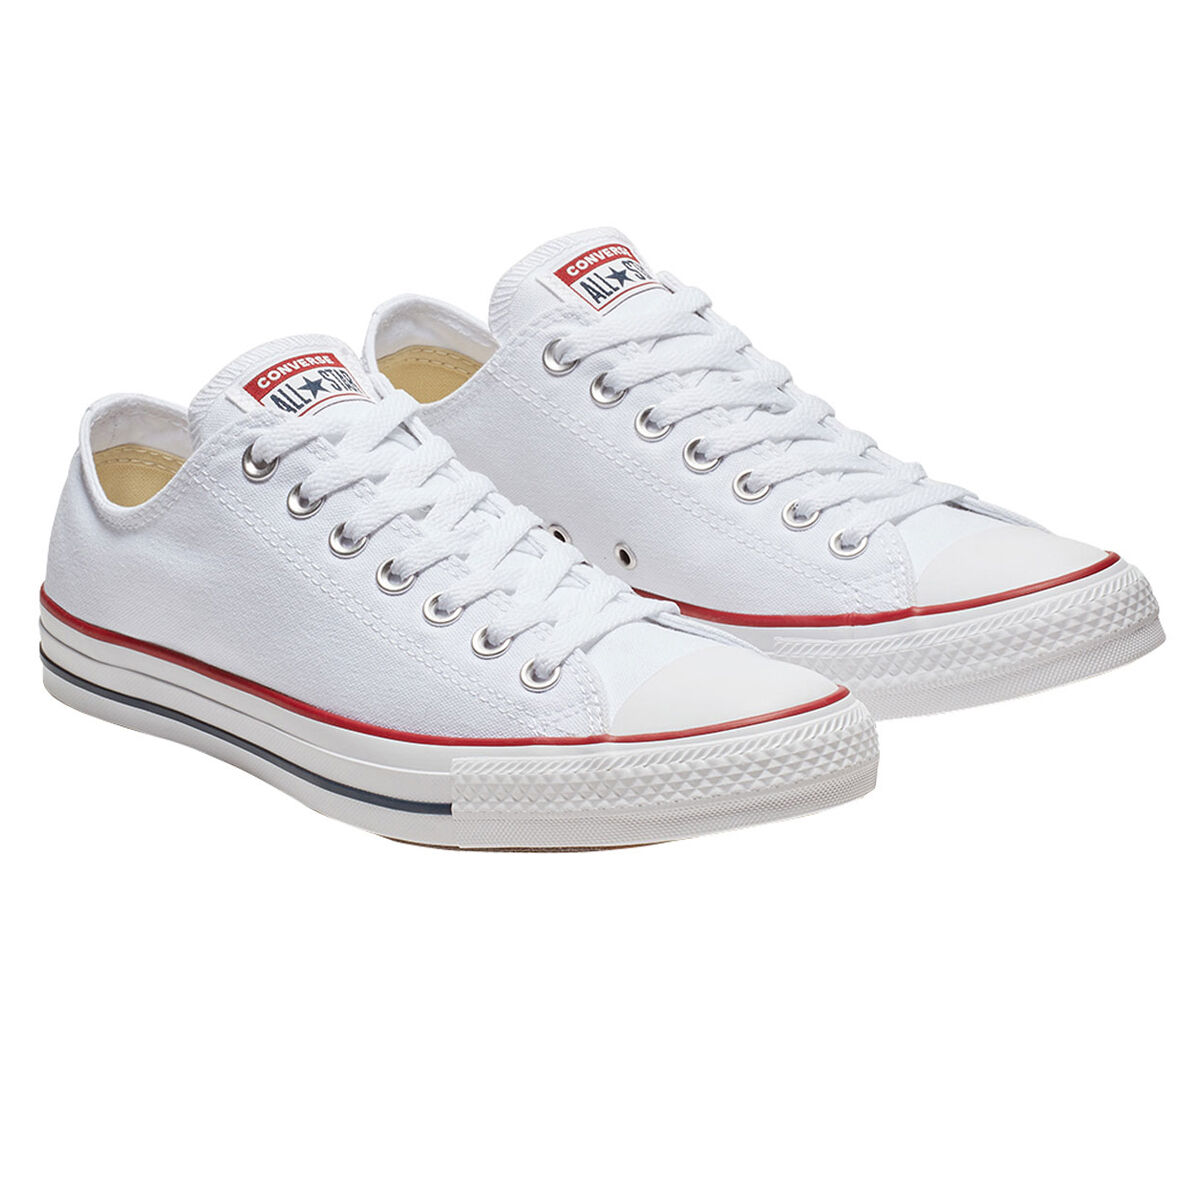 converse all star shoes on sale